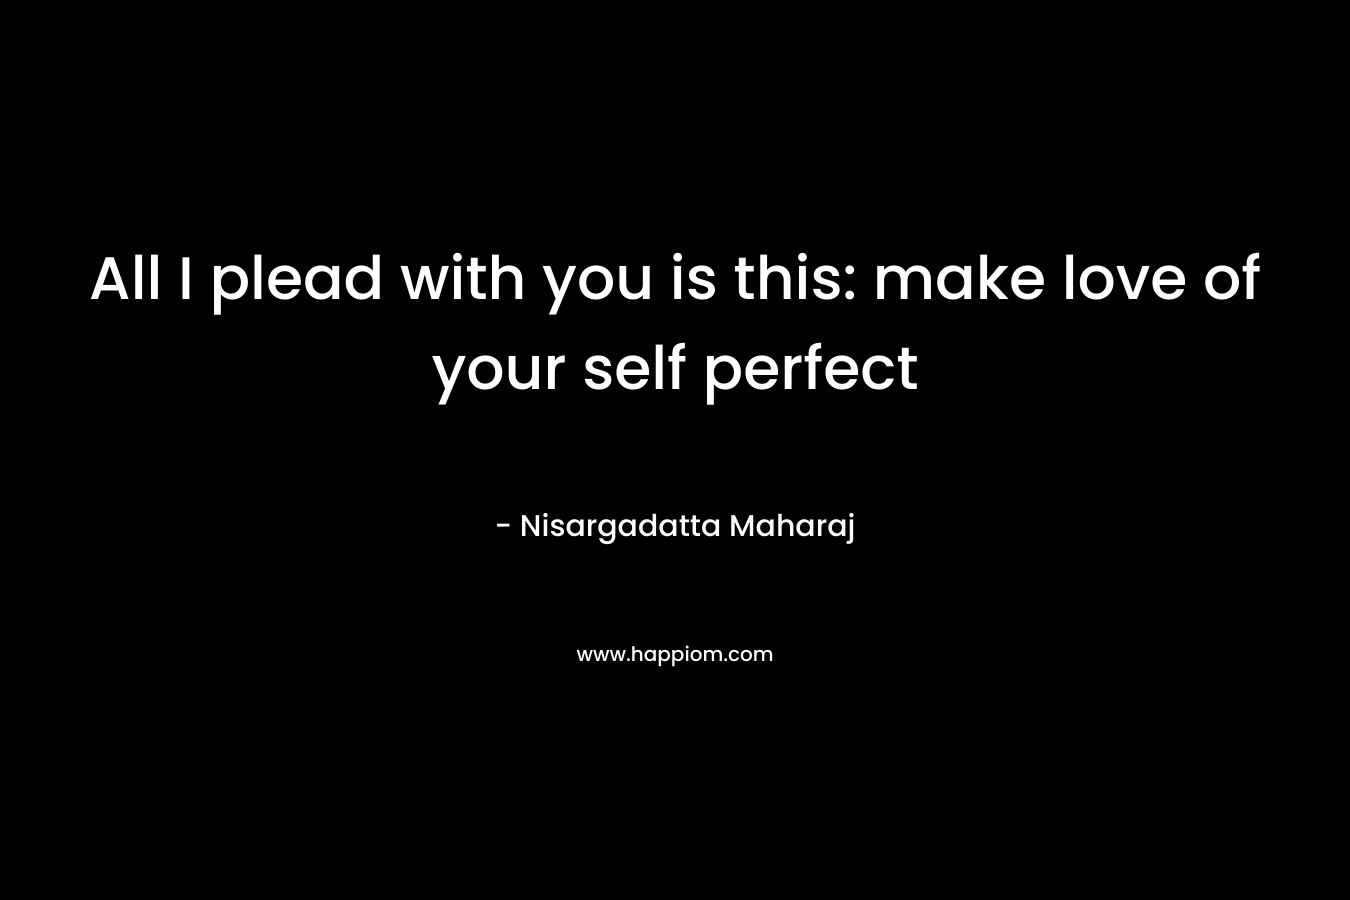 All I plead with you is this: make love of your self perfect